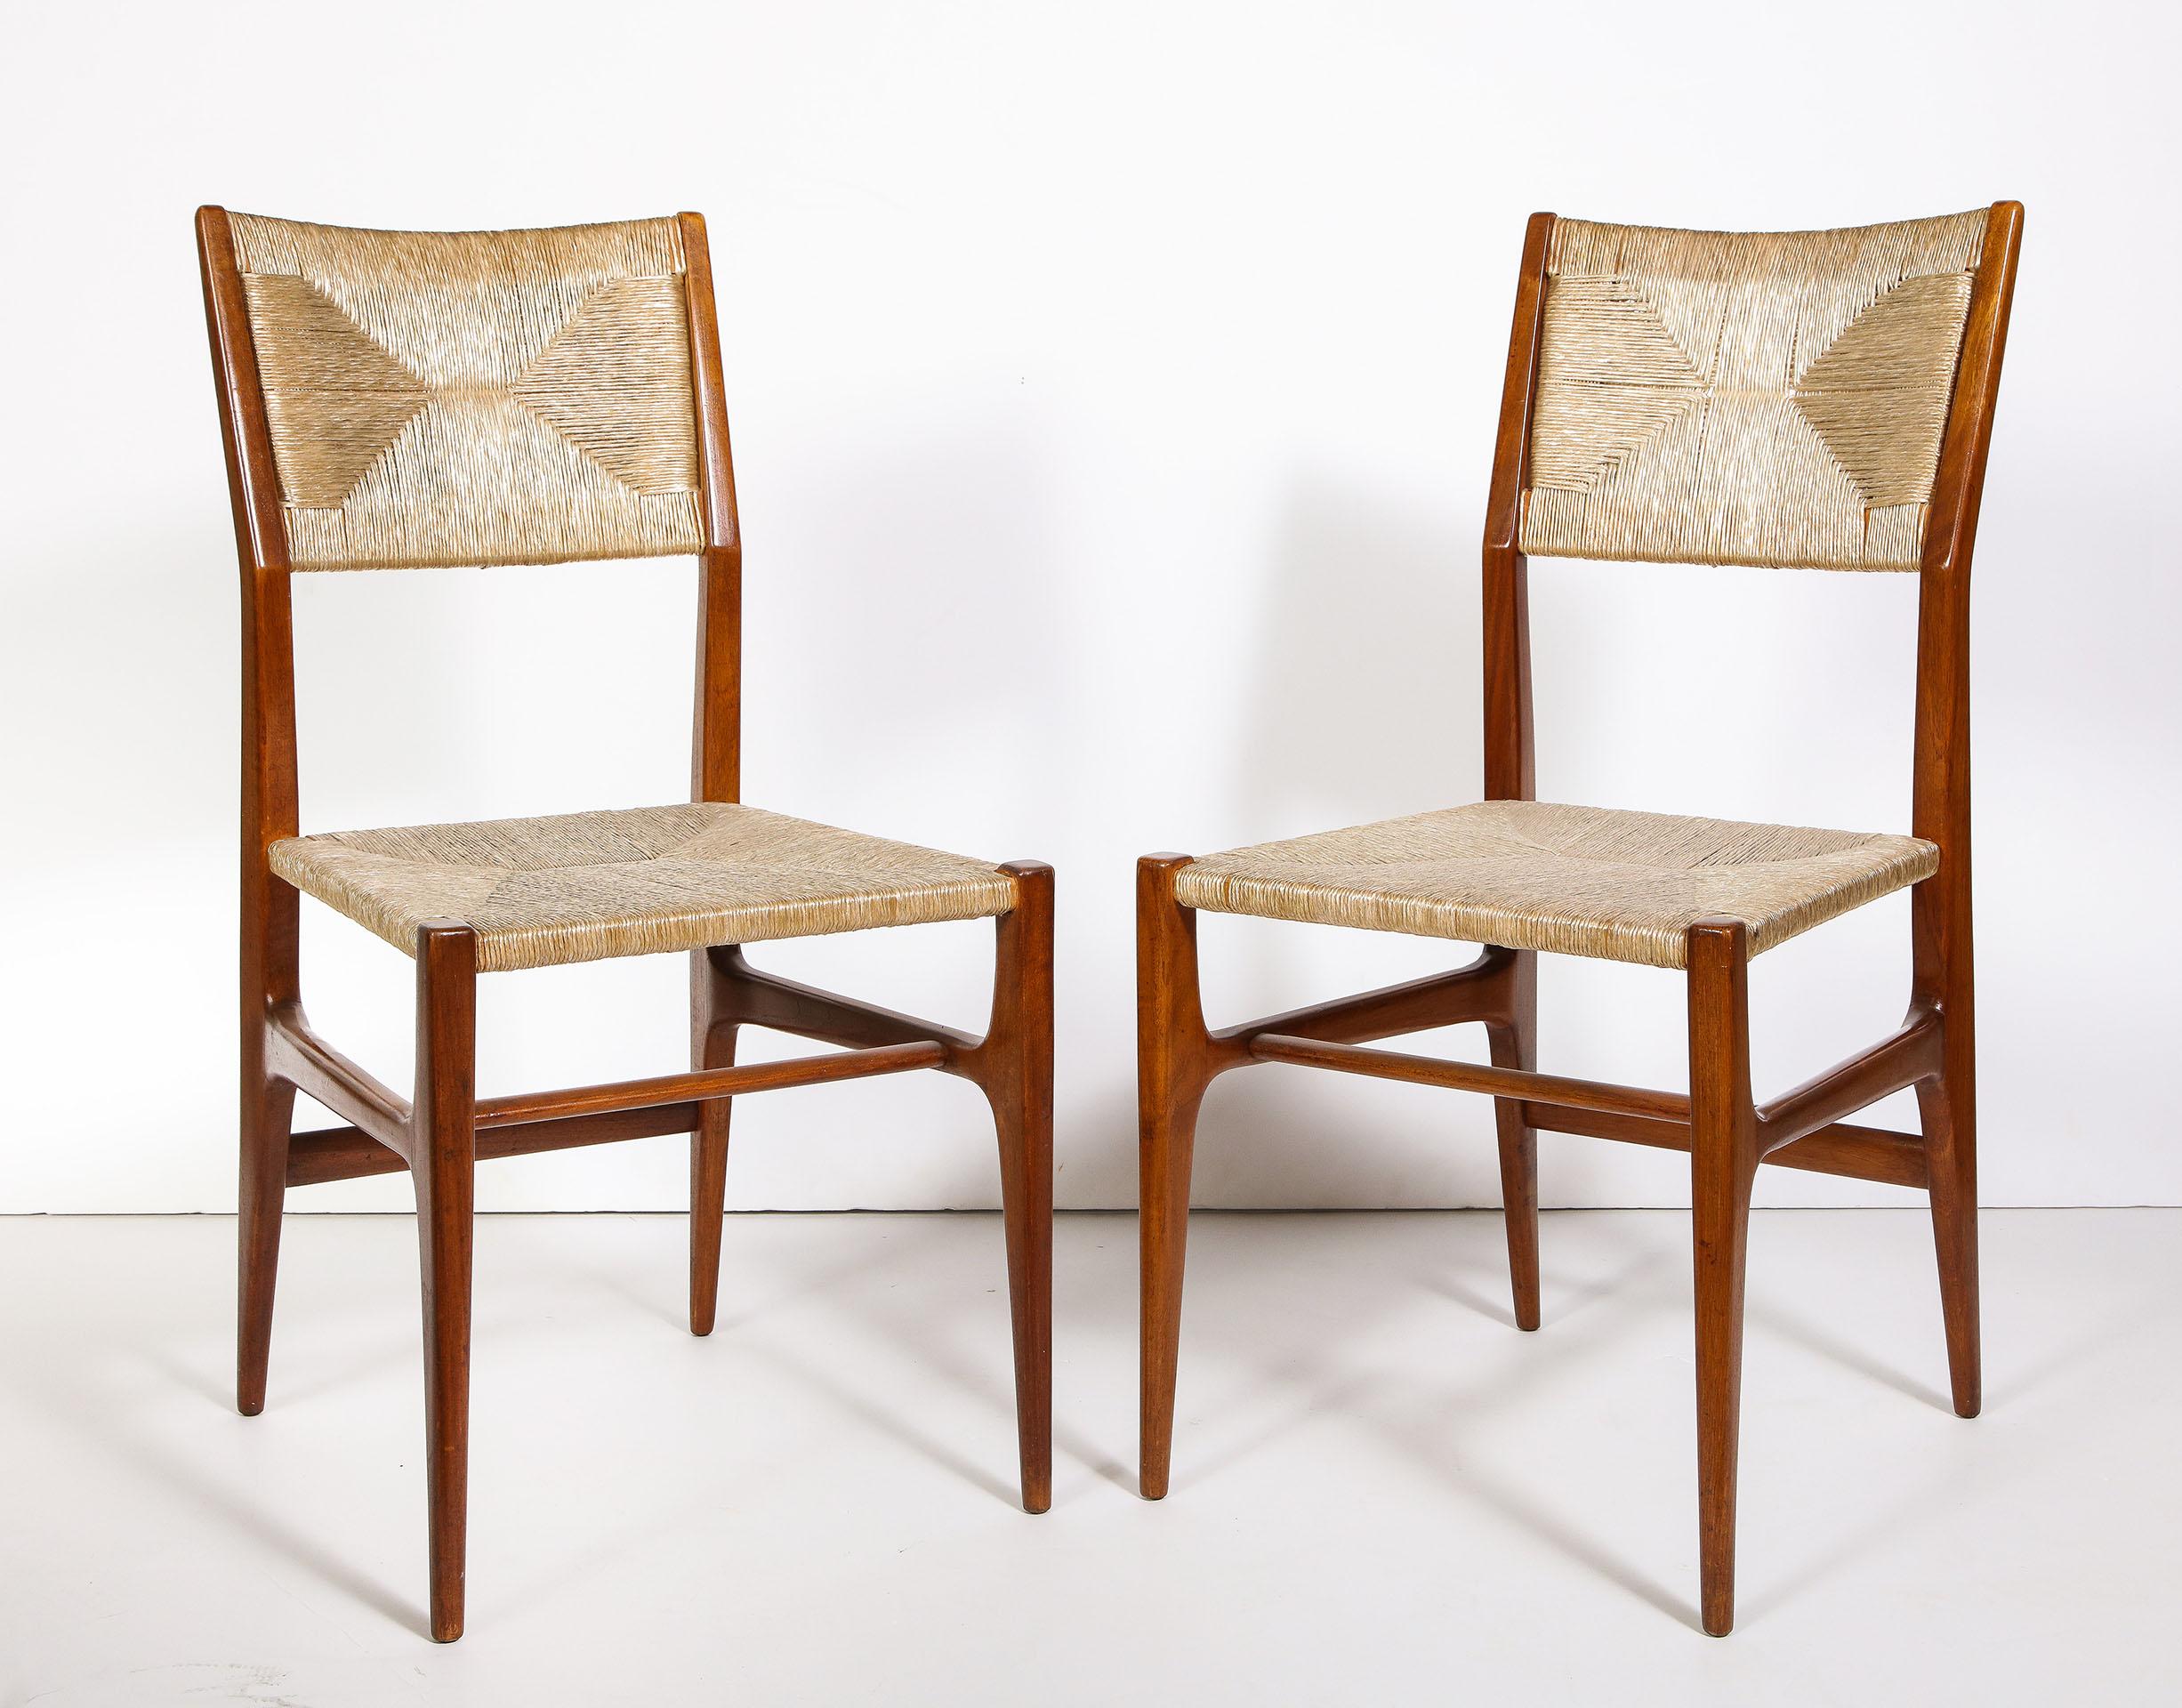 Solid mahogany frames with upholstered glossy coated twine seat and backrest.